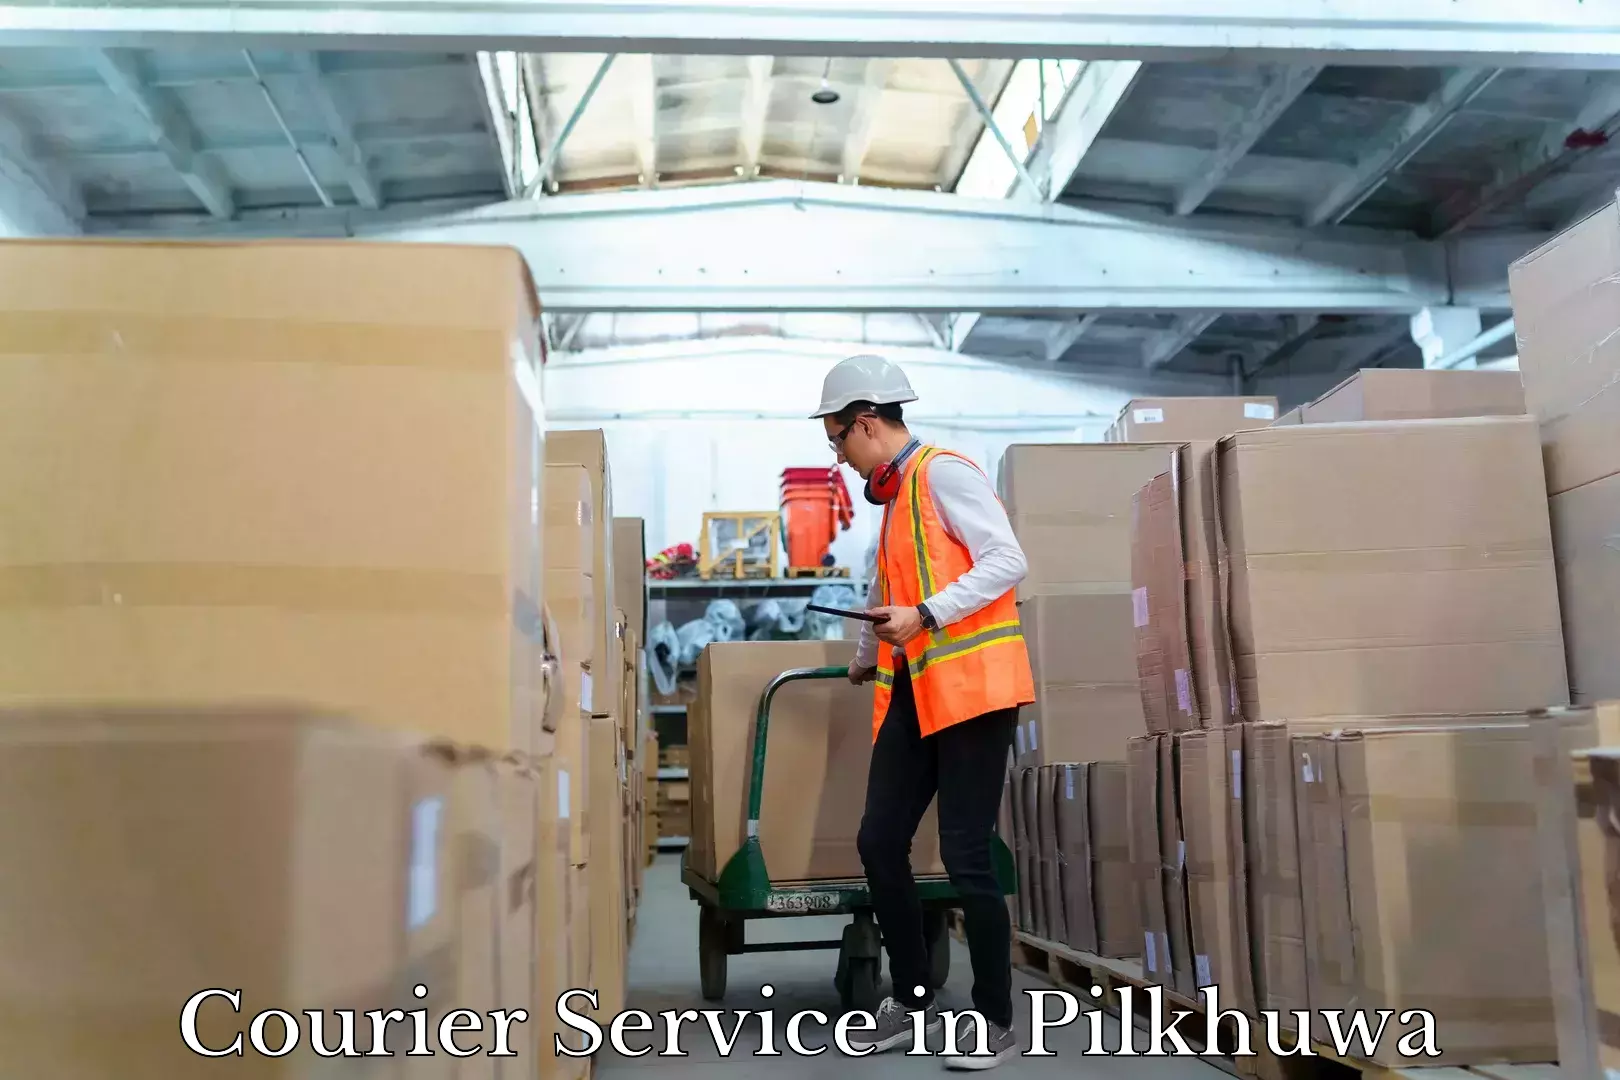 Full-service courier options in Pilkhuwa